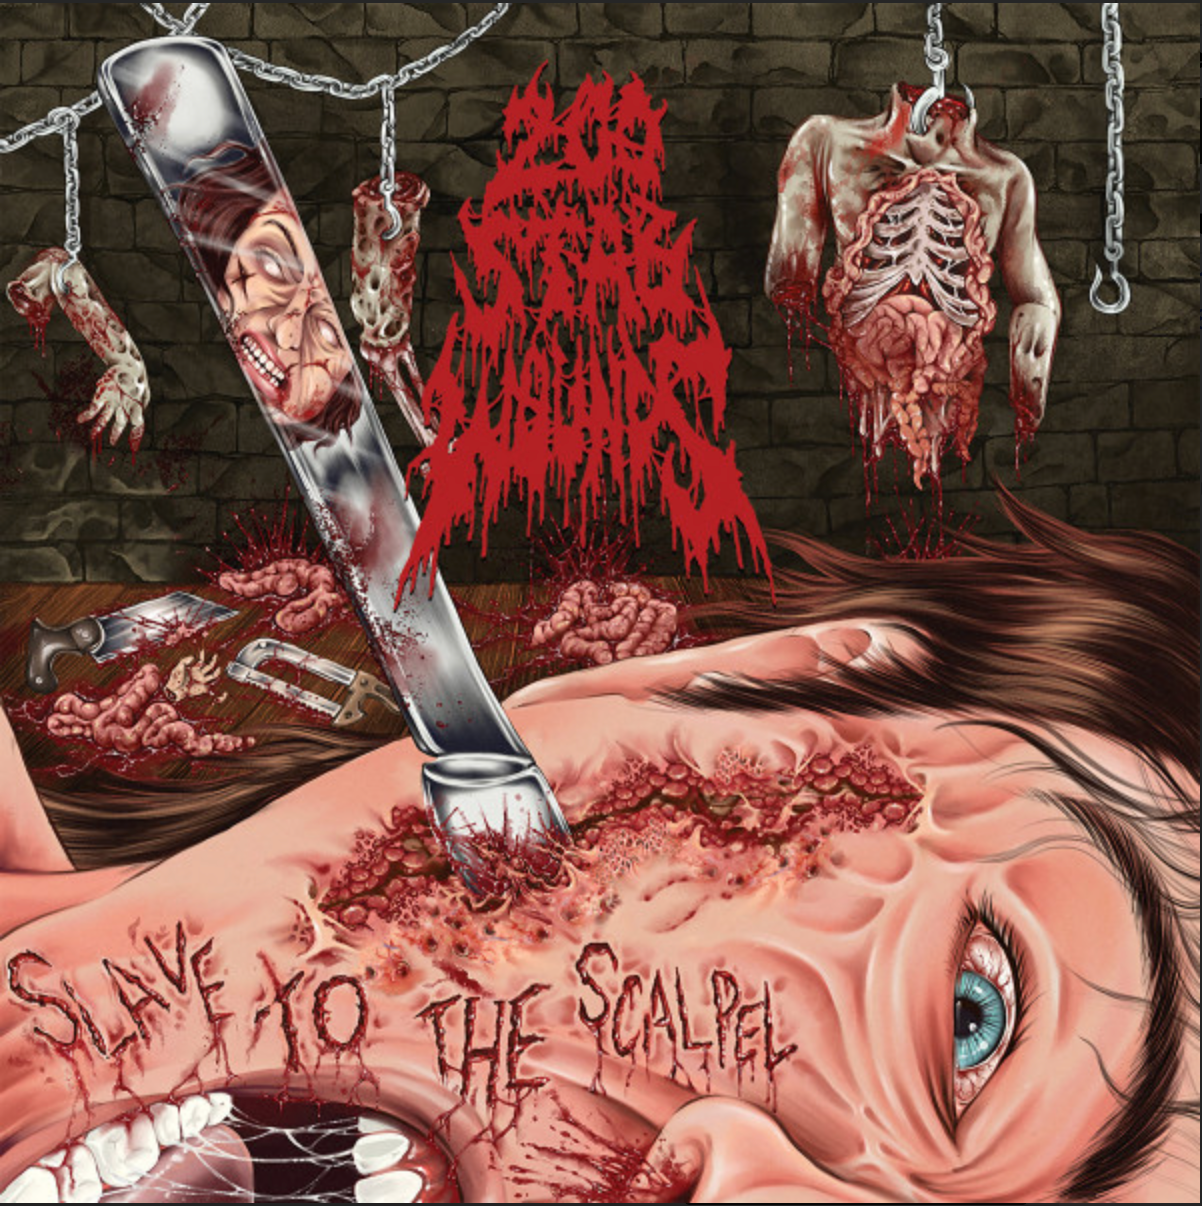 200 STAB WOUNDS - SLAVE TO THE SCALPEL Vinyl LP